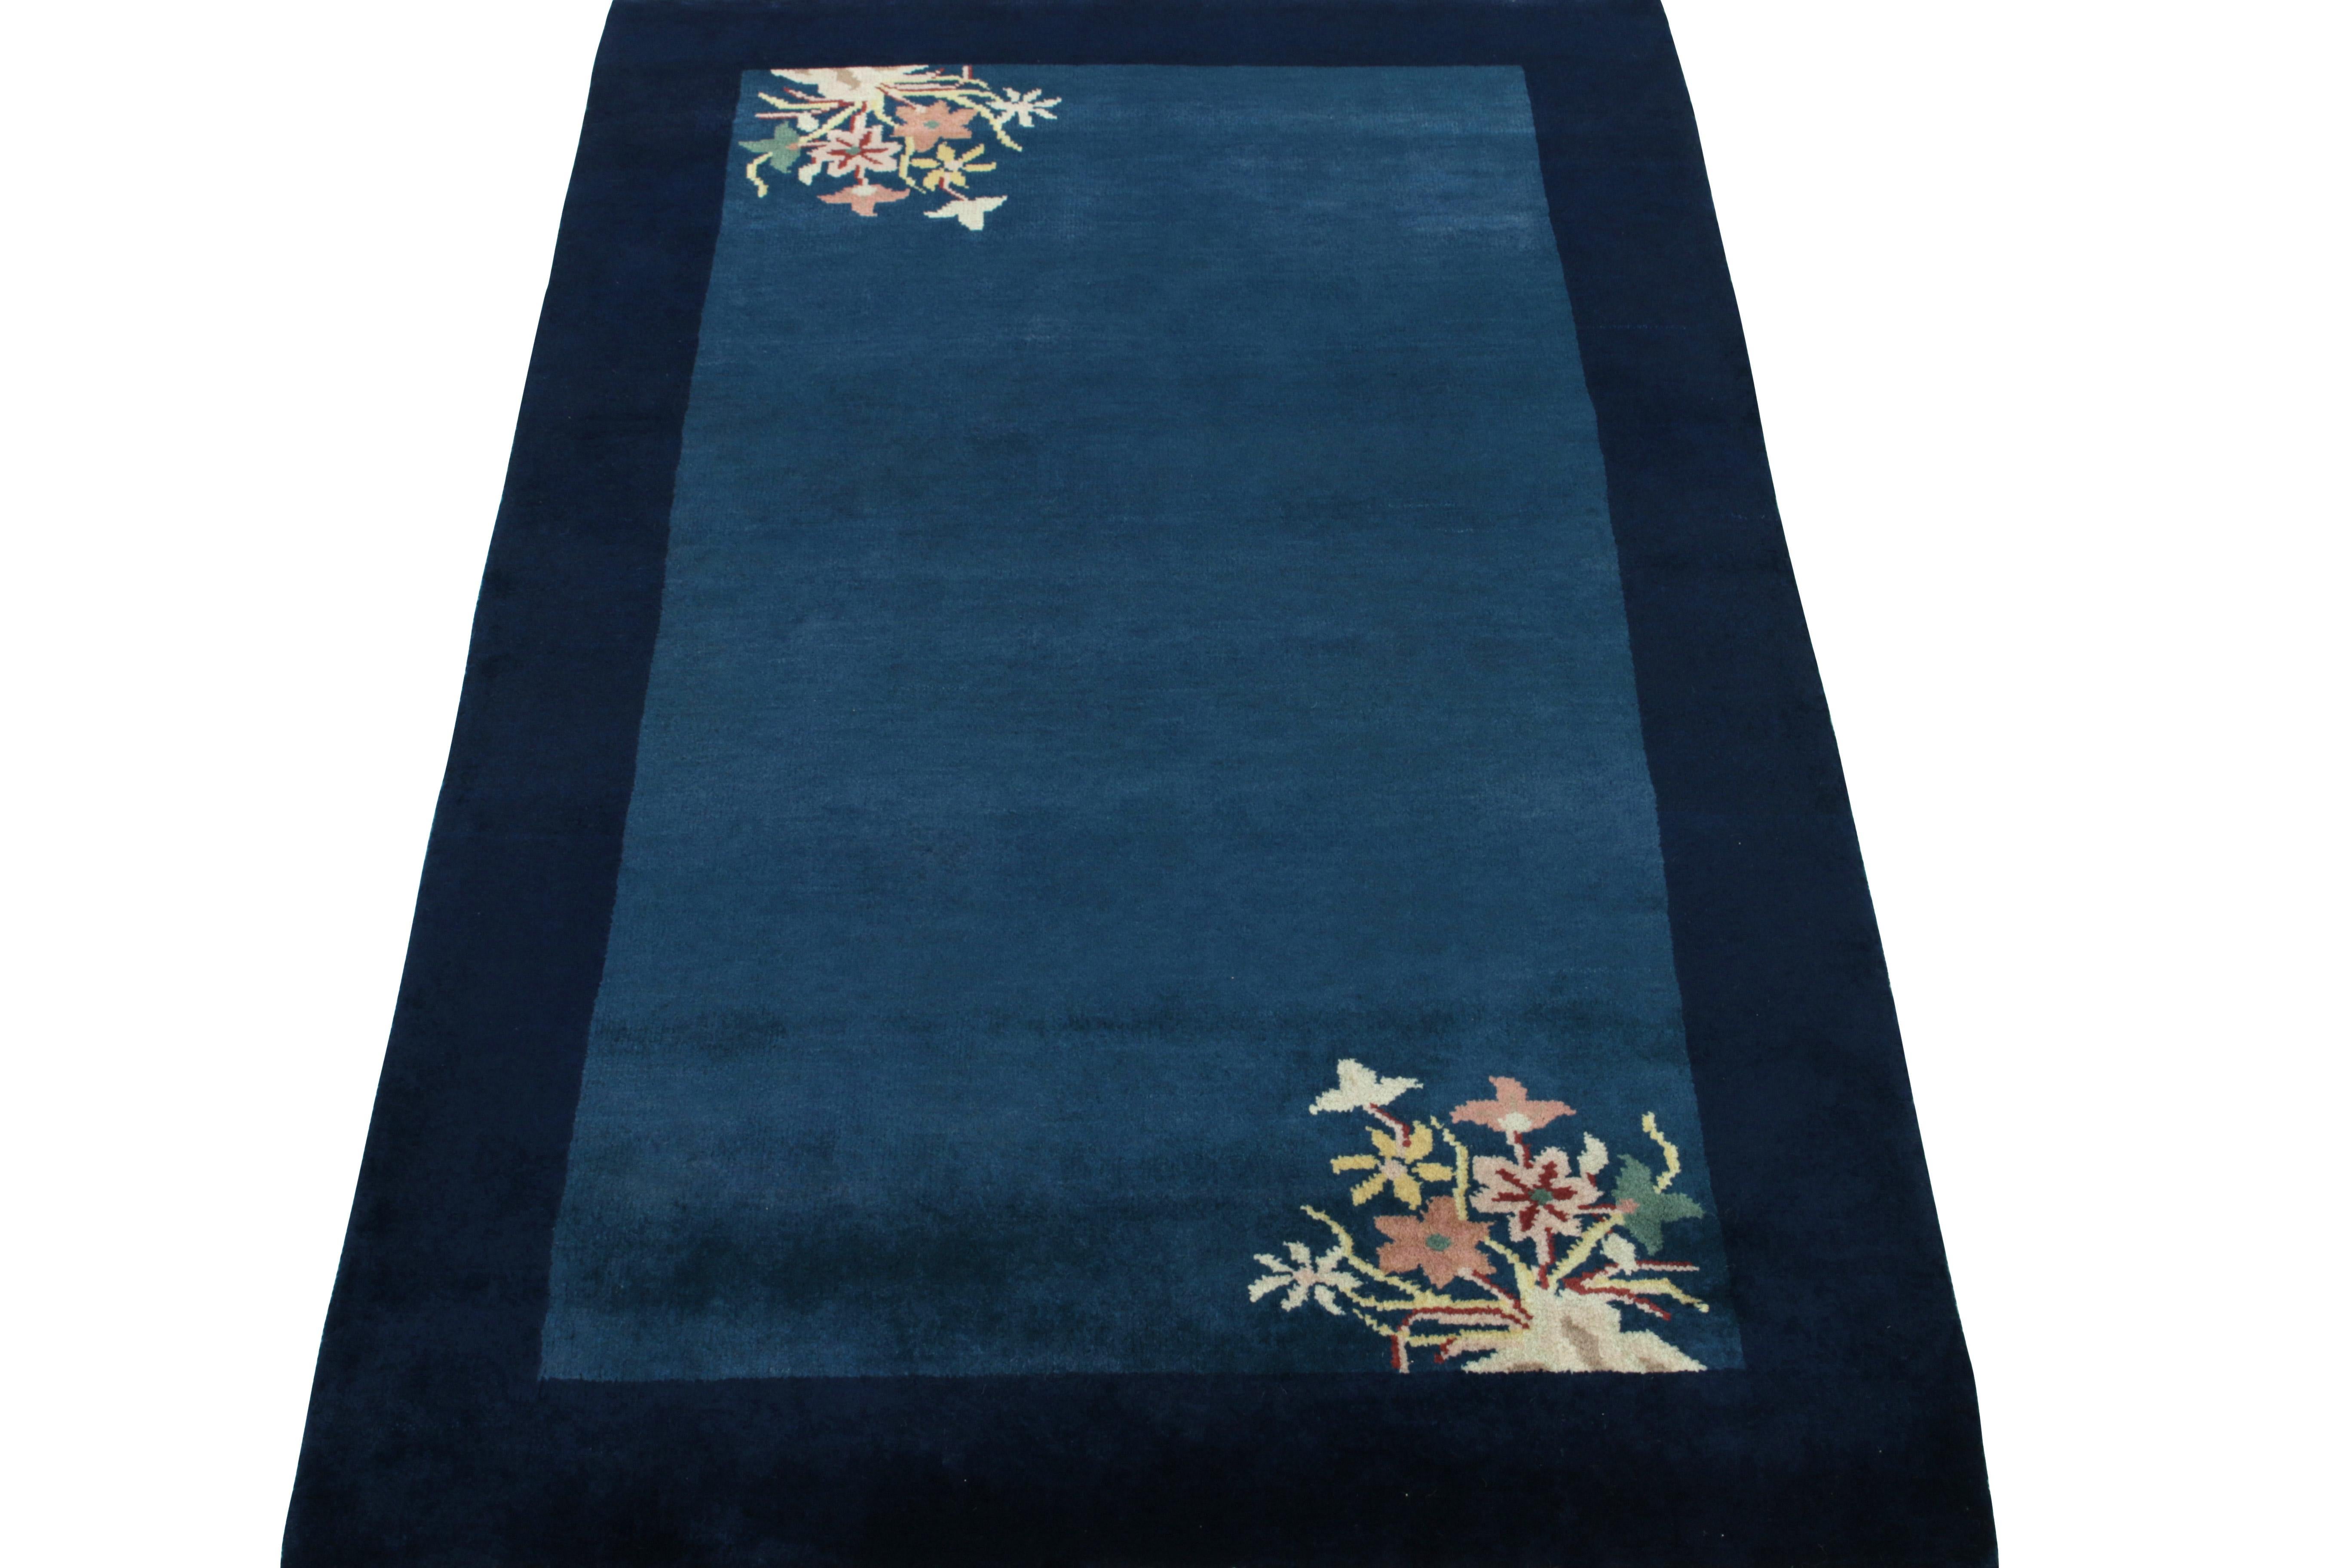 Hand-knotted in luscious wool, a 3 x 5 art deco rug carrying Chinese sensibilities of the 1920s. The deep blue tones marry the sheen of wool for an alluring lustre in a healthy pile. The piece witnesses light dark spots in blue on the open field